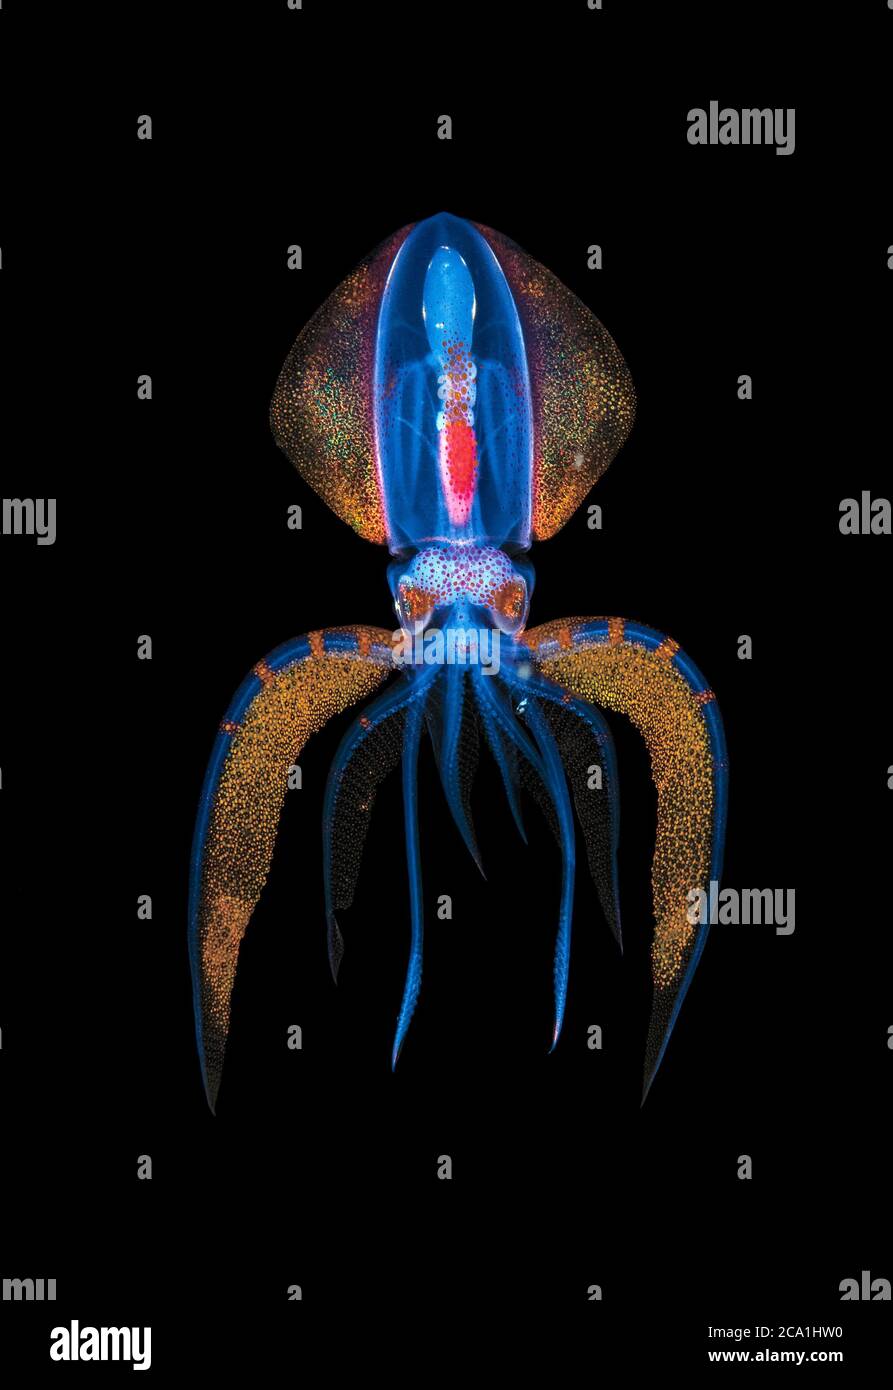 A juvenile deep water Diamond Squid, Thysanoteuthis rhombus, makes an appearance and flashes colors during a black water drift dive near the surface i Stock Photo